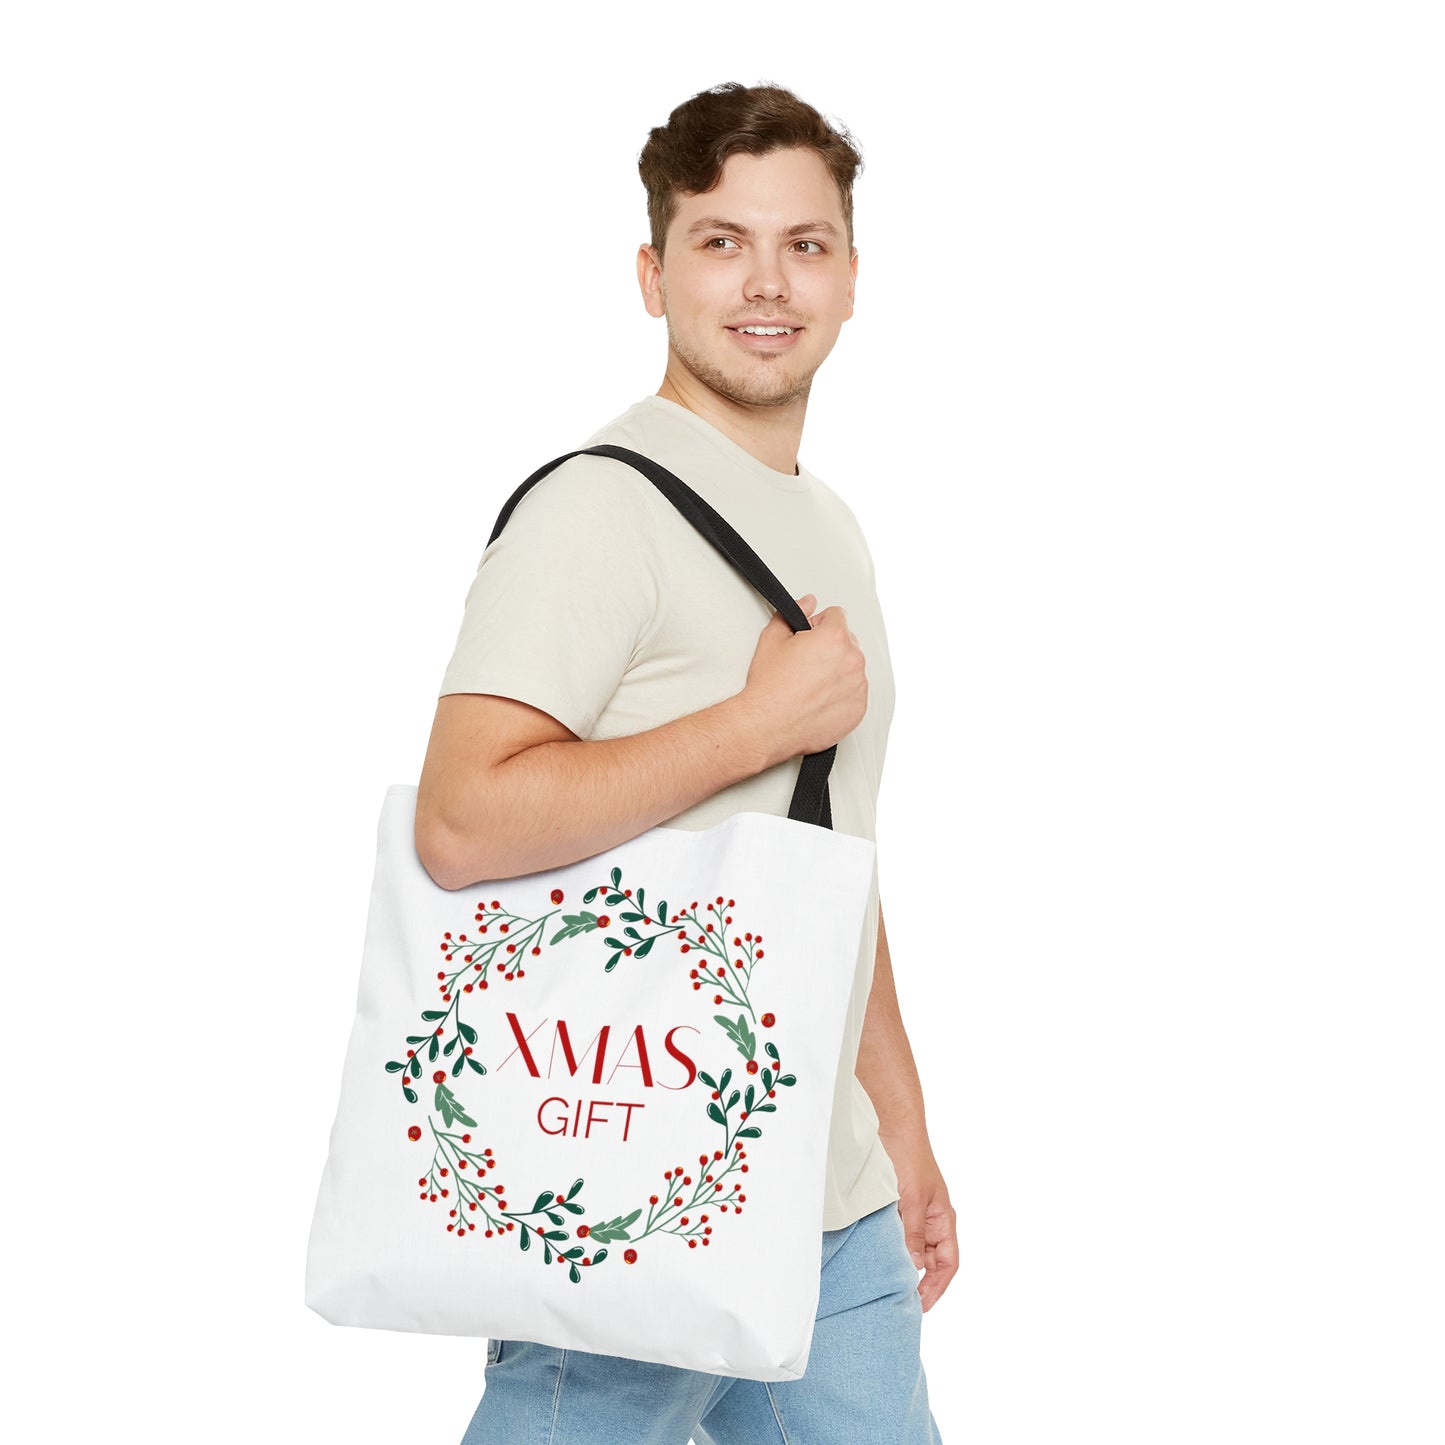 Xmas Gift Printed Canvas Tote Bags for Her and Him